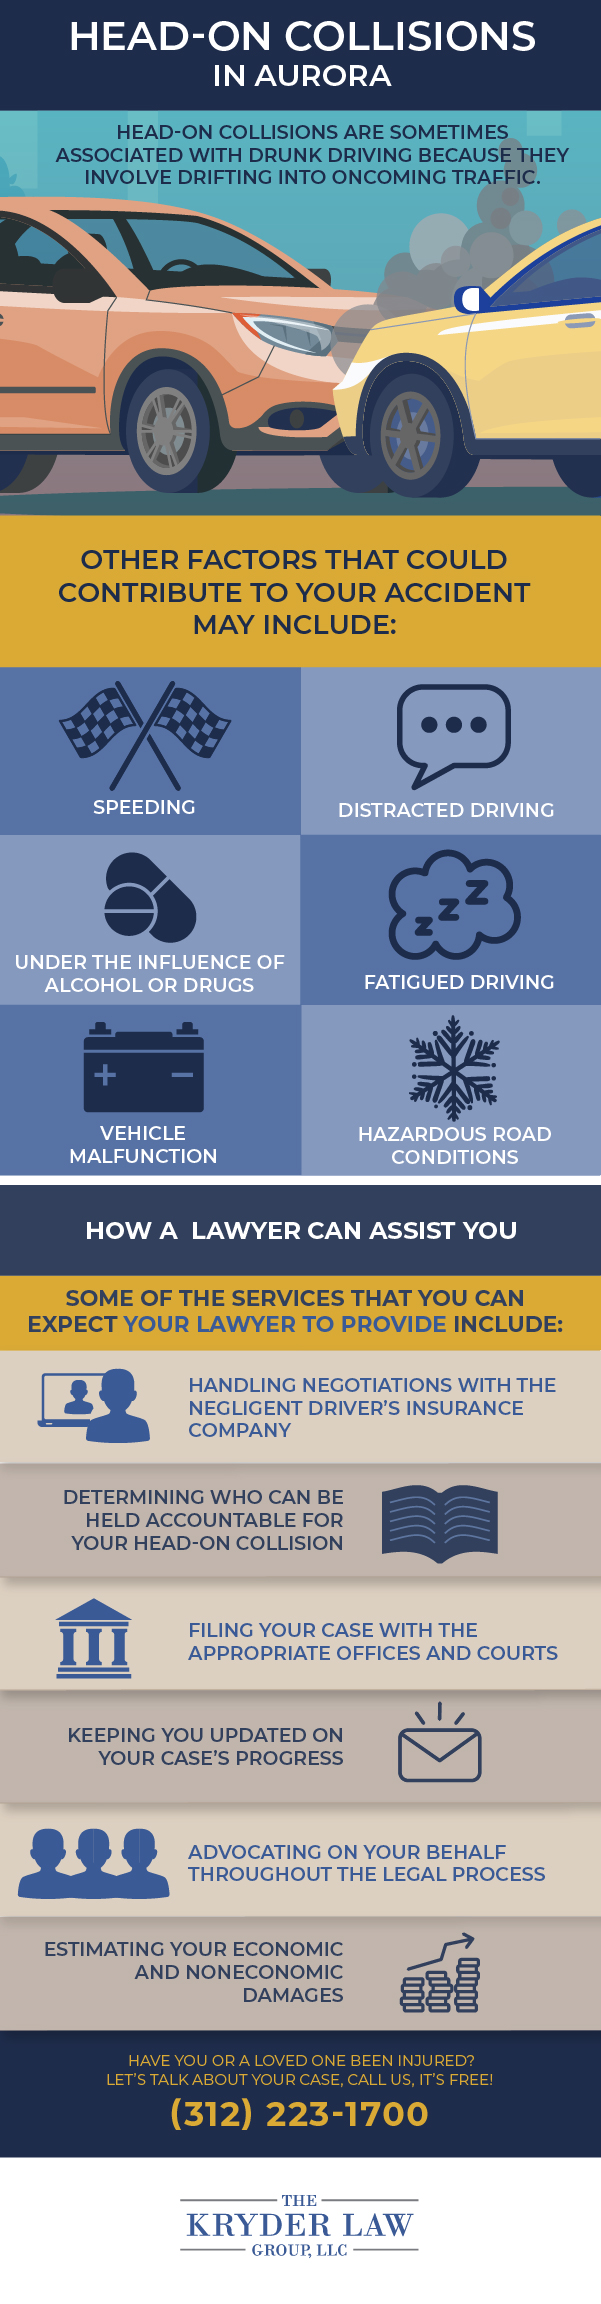 Aurora Head-On Collisions Lawyer Infographic